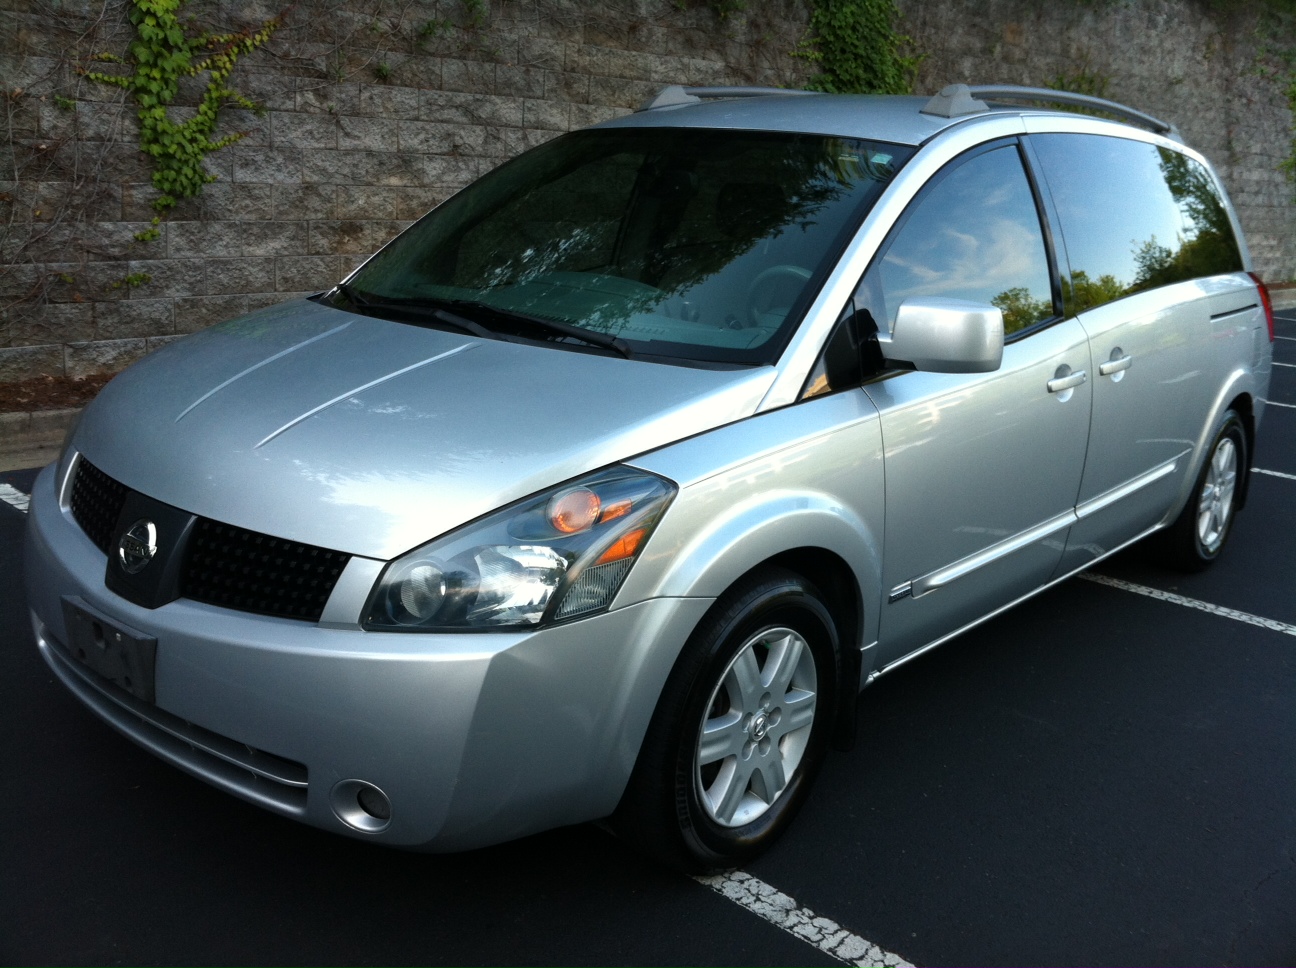 2006 Nissan quest special edition reviews #9